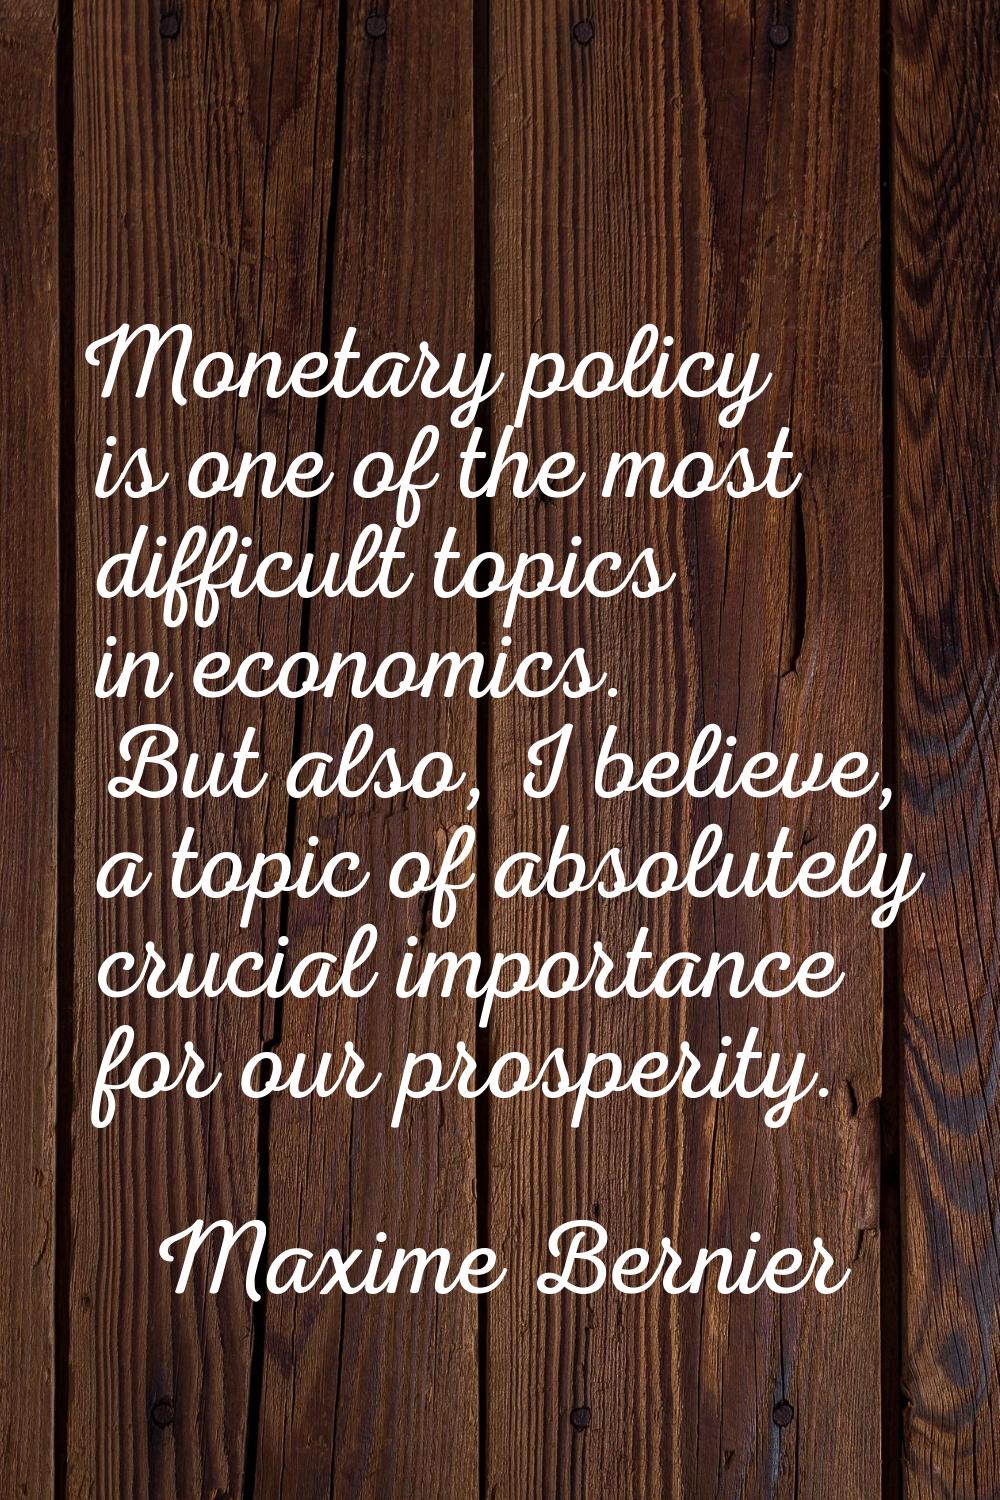 Monetary policy is one of the most difficult topics in economics. But also, I believe, a topic of a